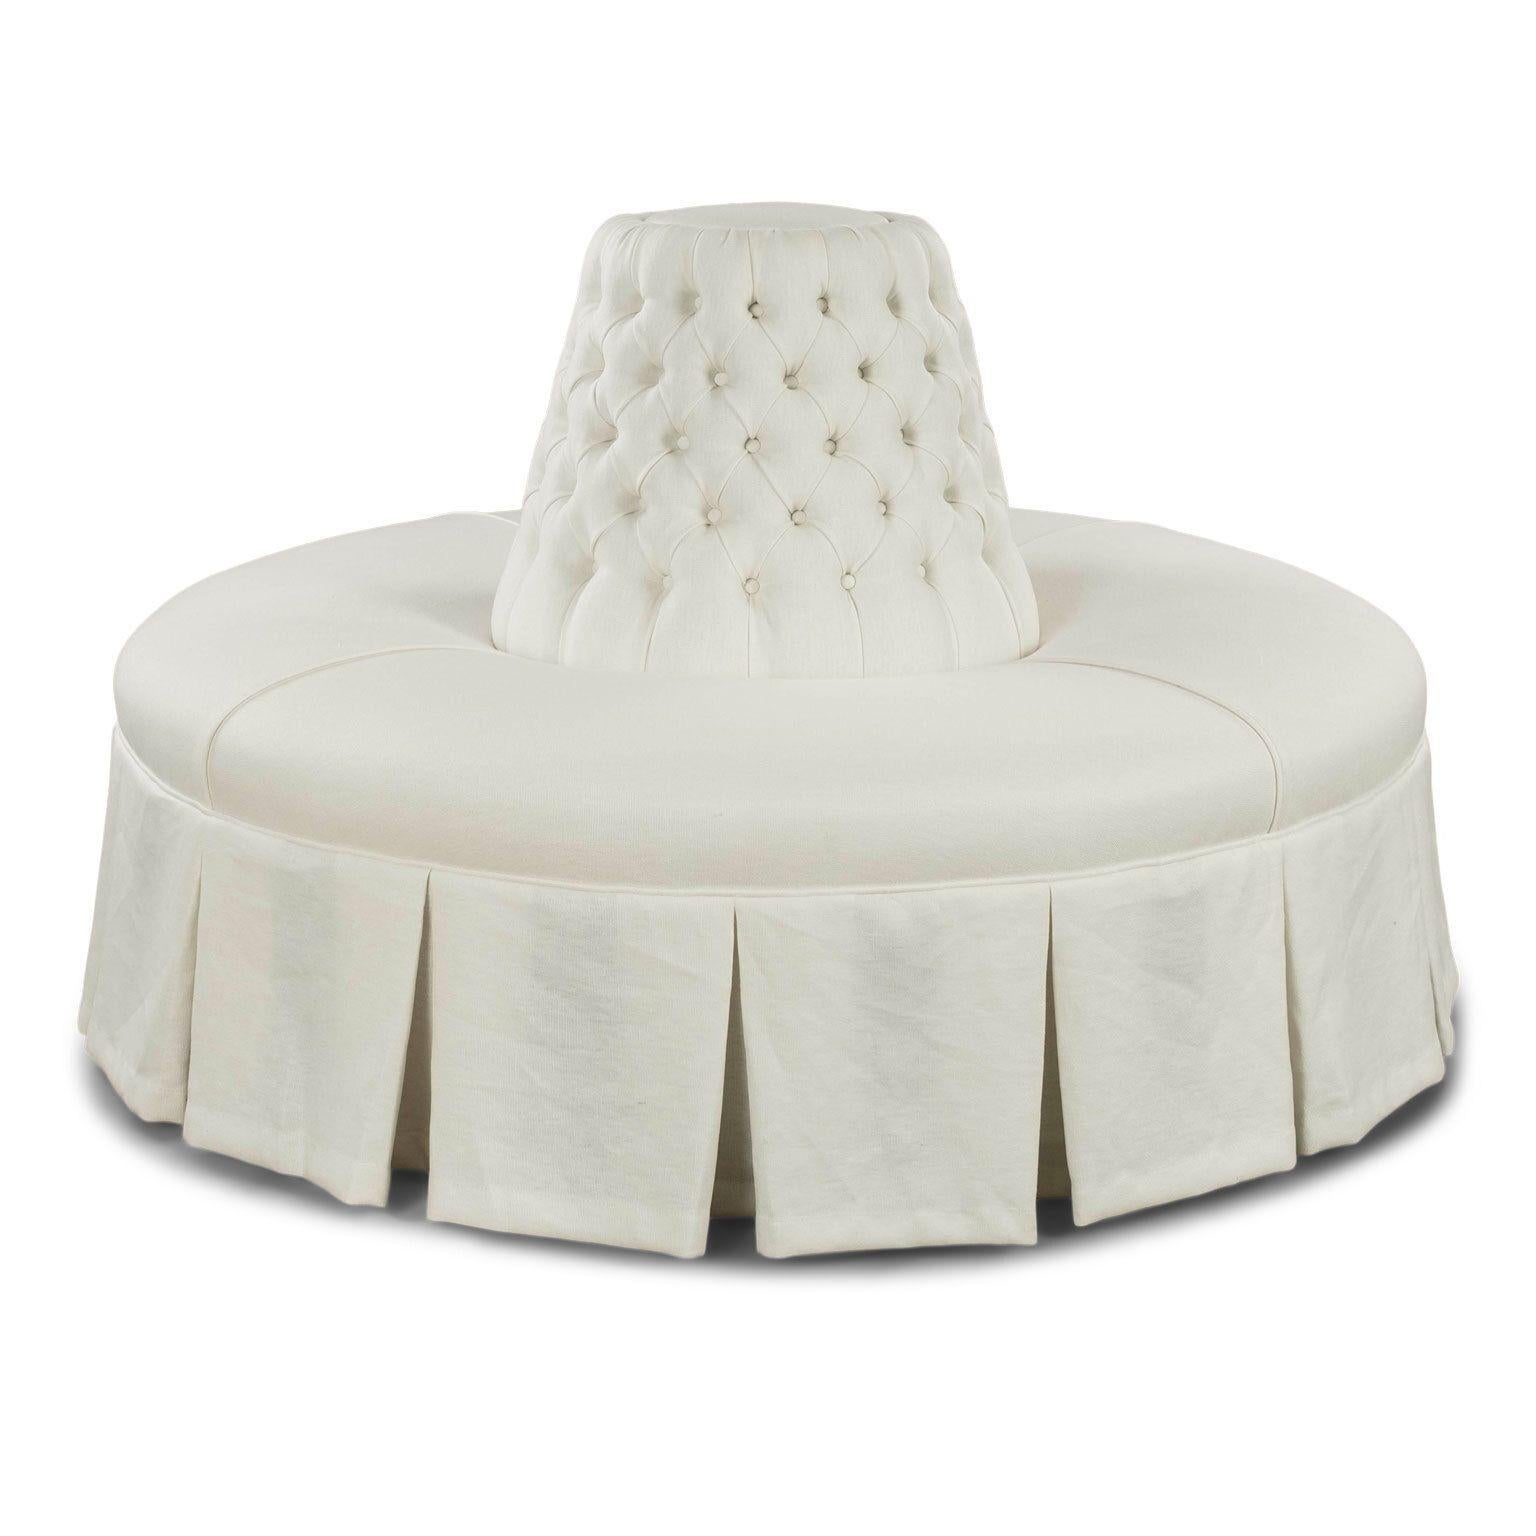 Hand-Carved Large Round White-Linen Upholstered Banquette